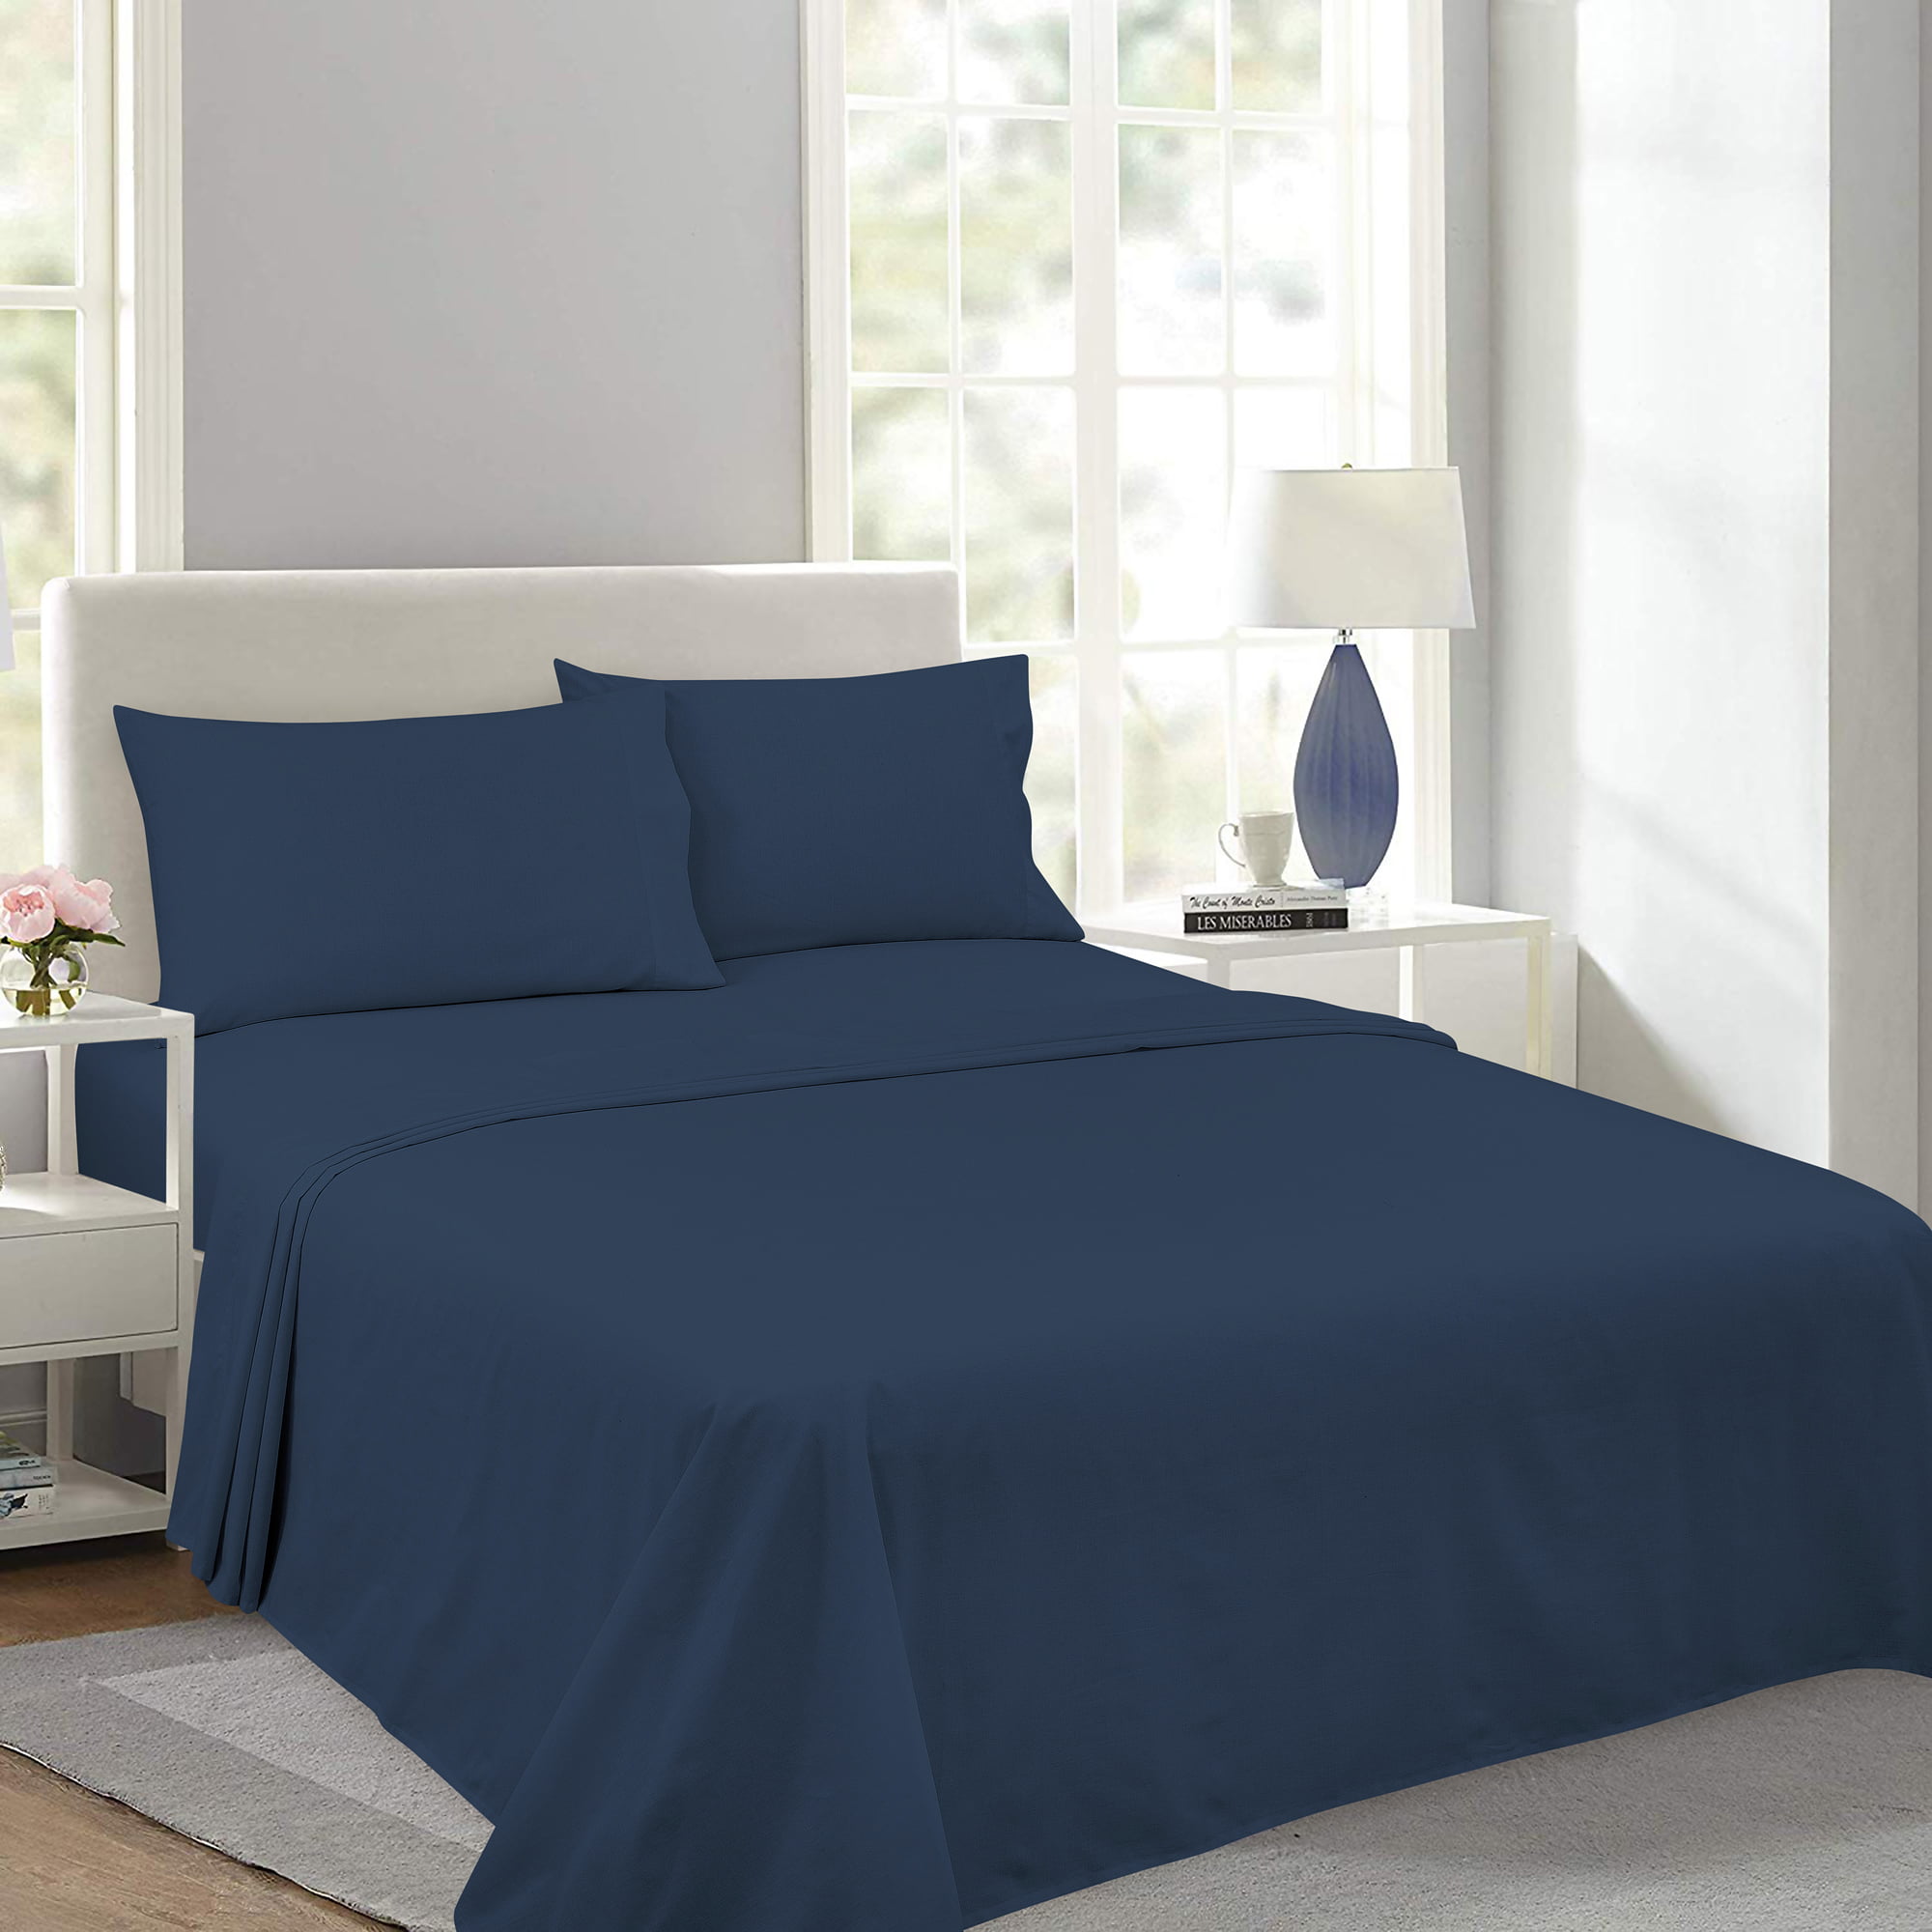 Full 4-Piece She Details about   Royale Linens Soft Home Brushed Percale Ultra Soft 100% Cotton 